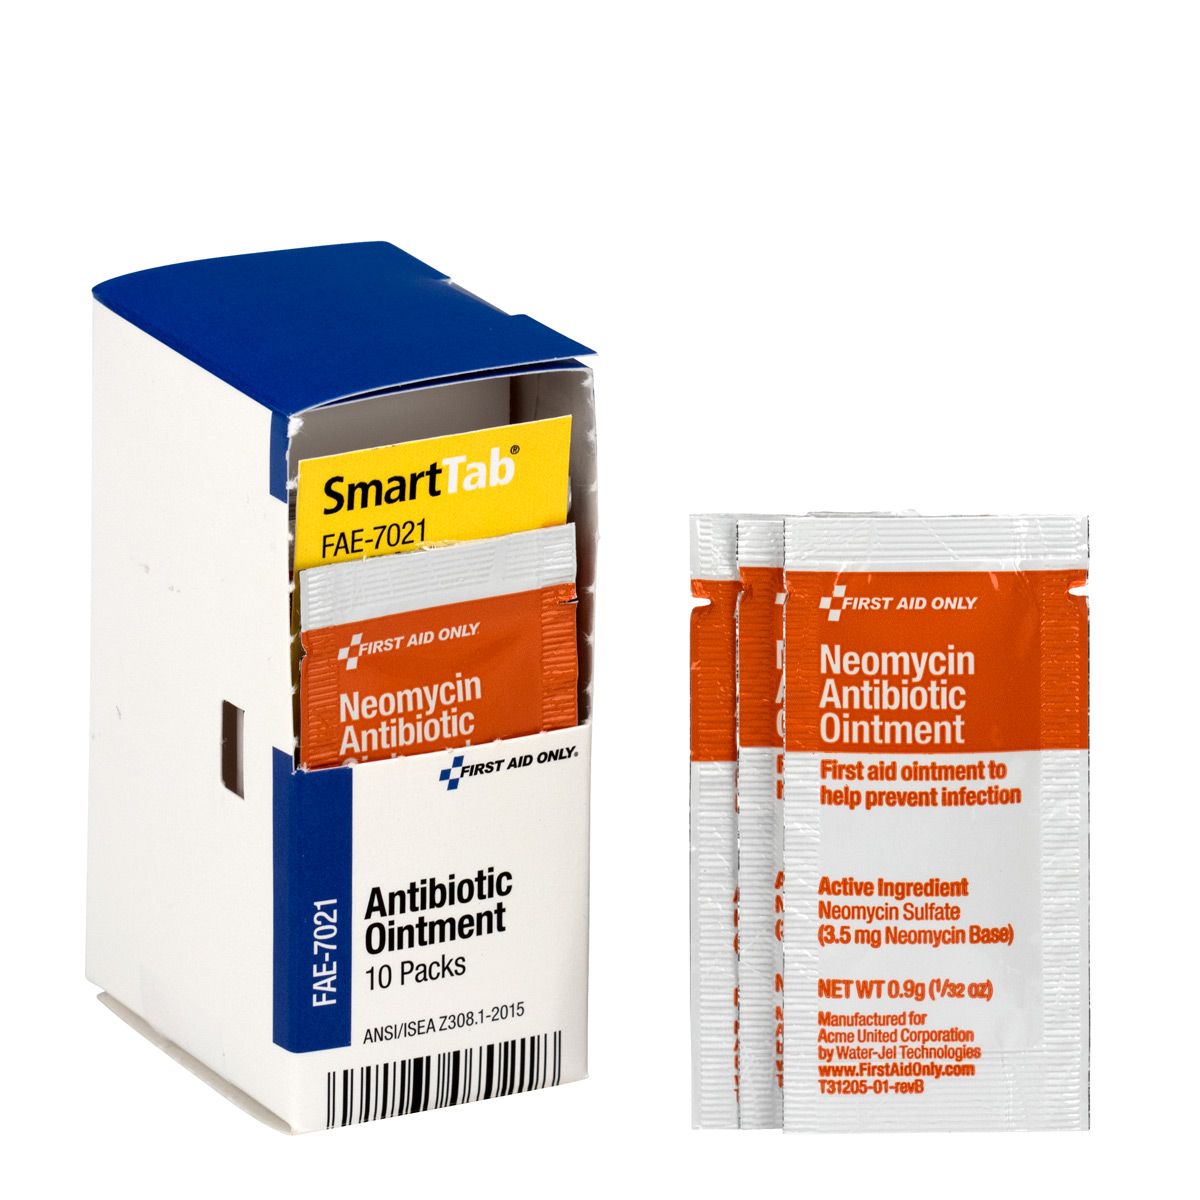 First Aid Only SmartCompliance Refill Antibiotic Ointment, 10 Per Box from GME Supply